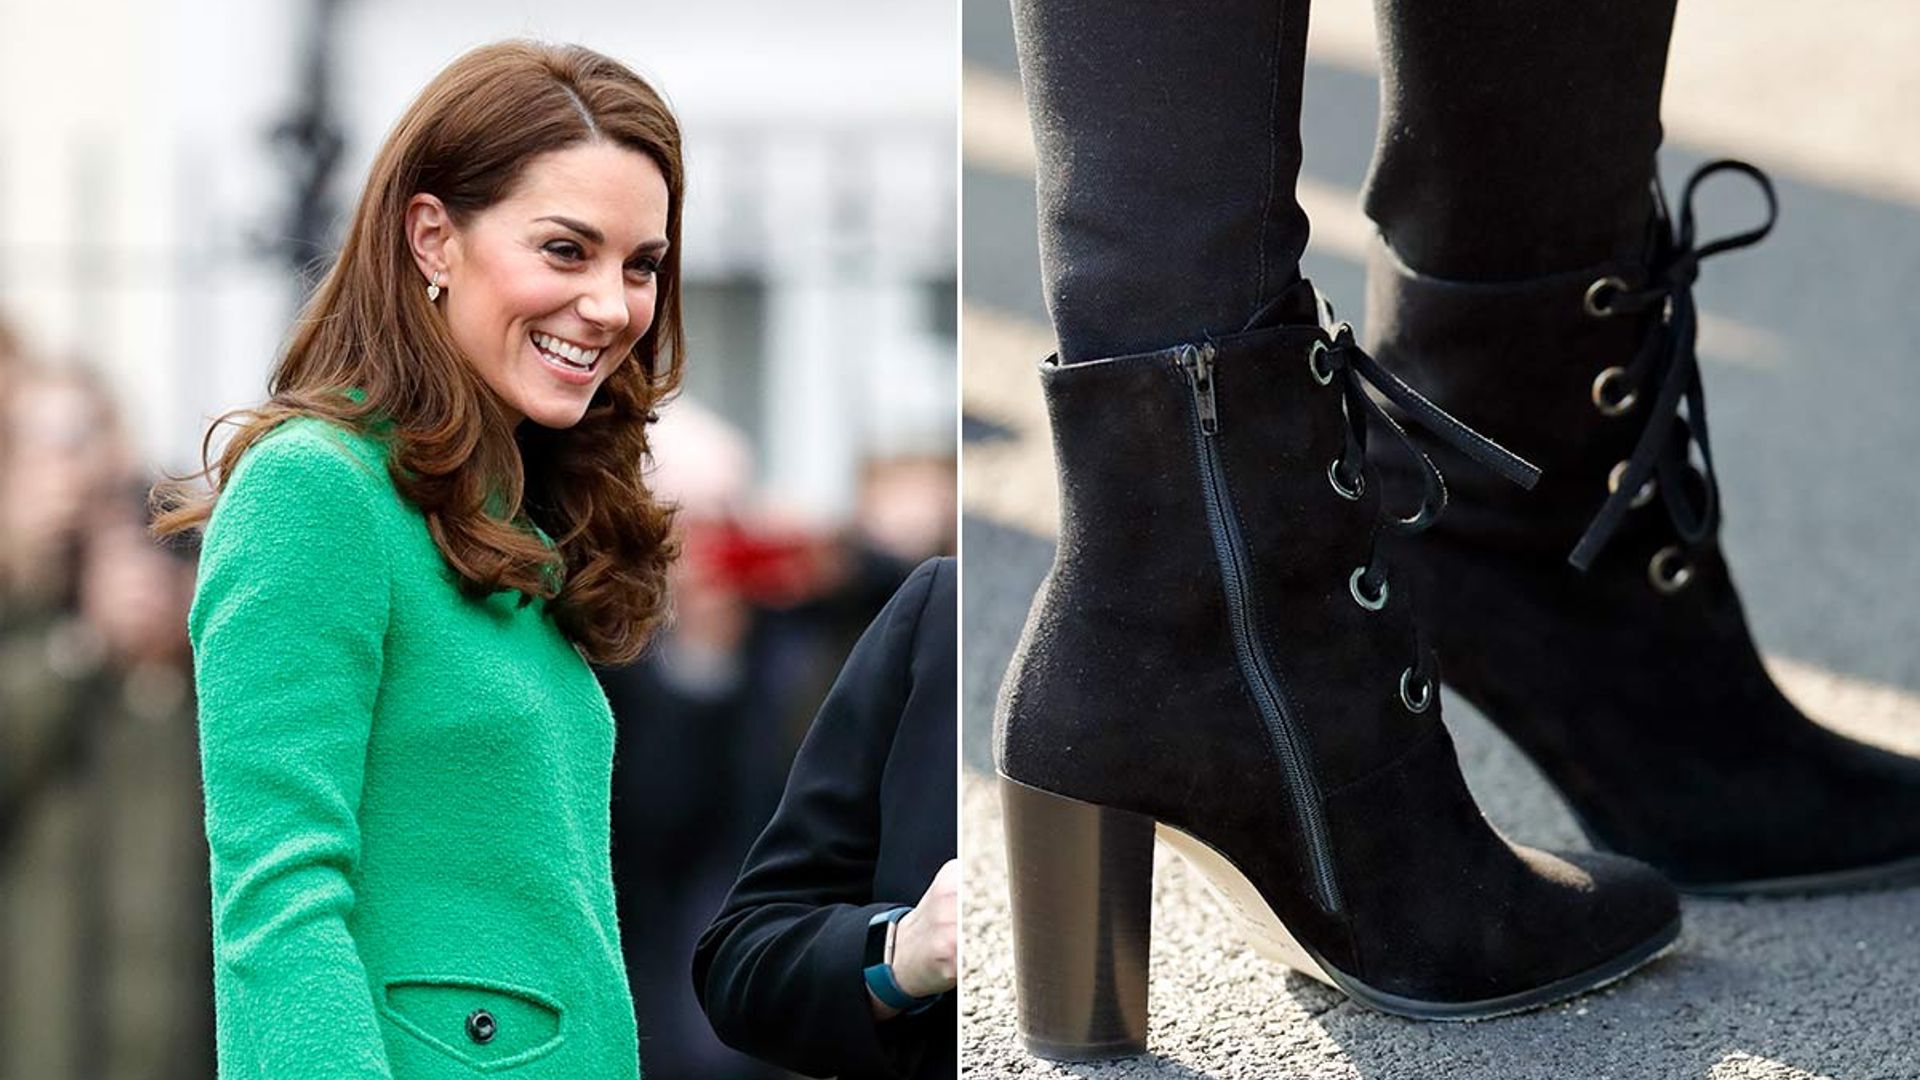 prison Profession whistle Love Kate Middleton's lace-up suede boots? Marks & Spencer is selling a  similar pair | HELLO!